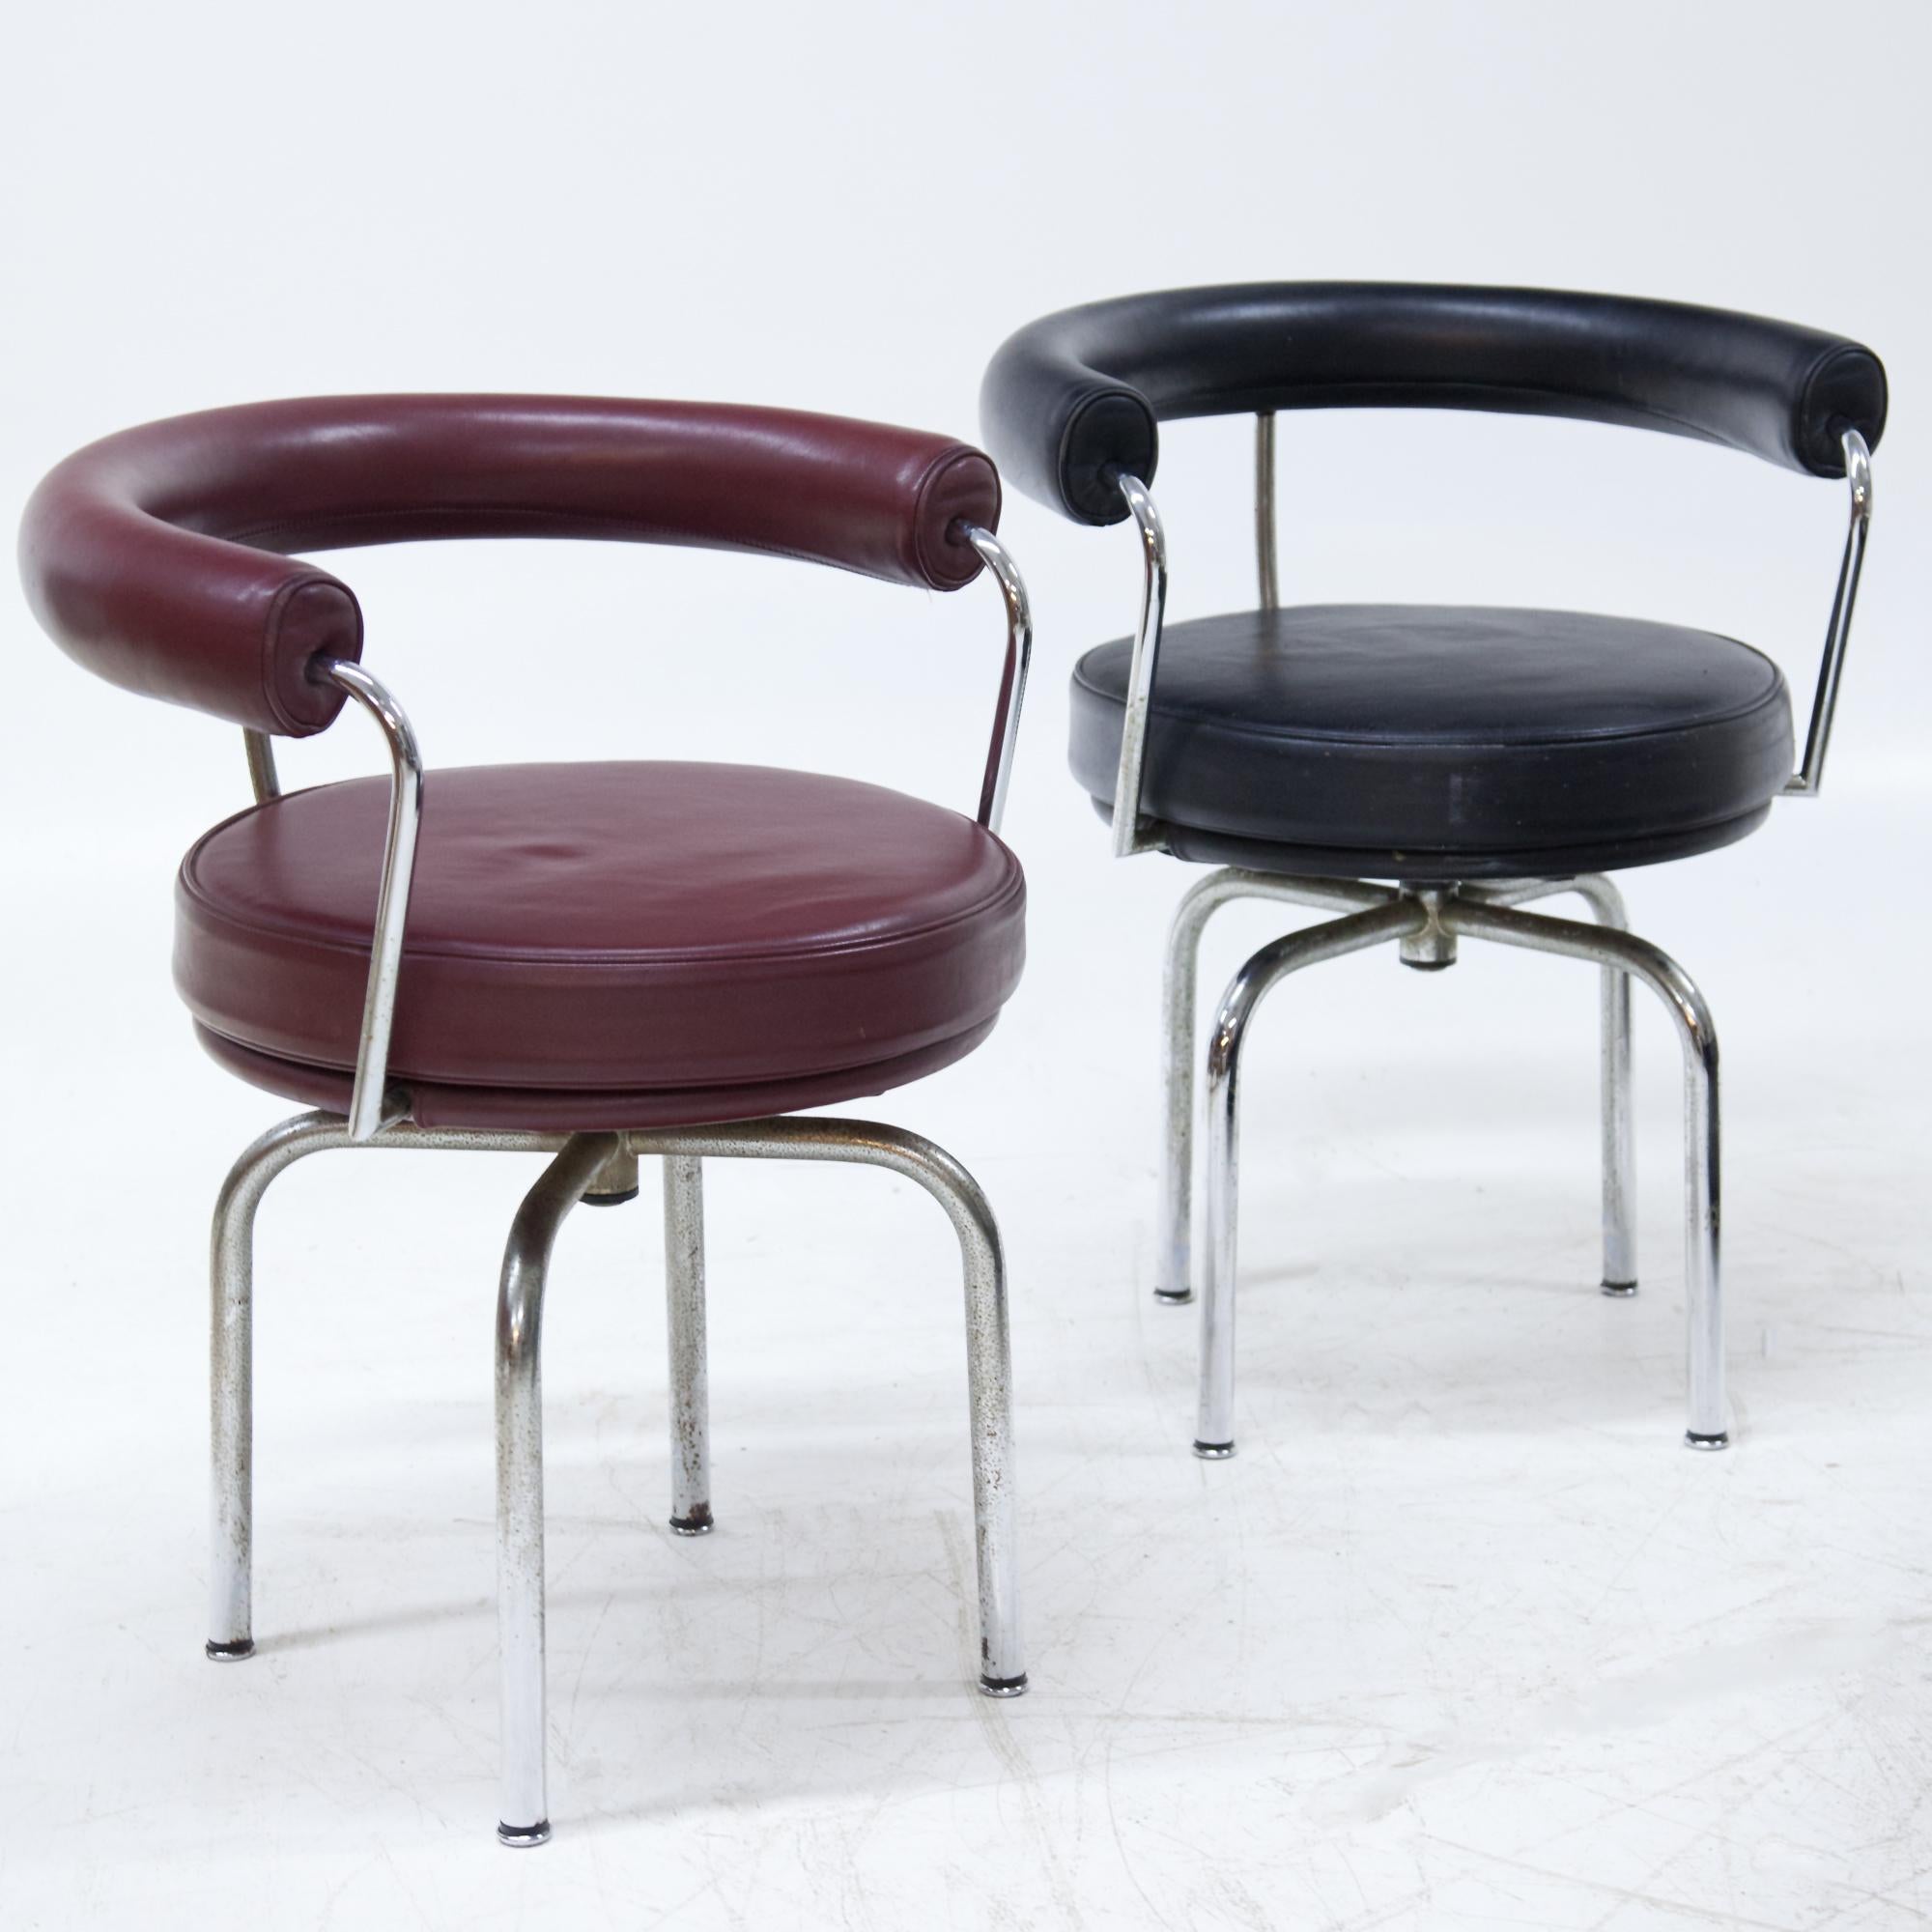 European LC7 Swivel Chairs by Cassina, Tubular Steel, 1970s